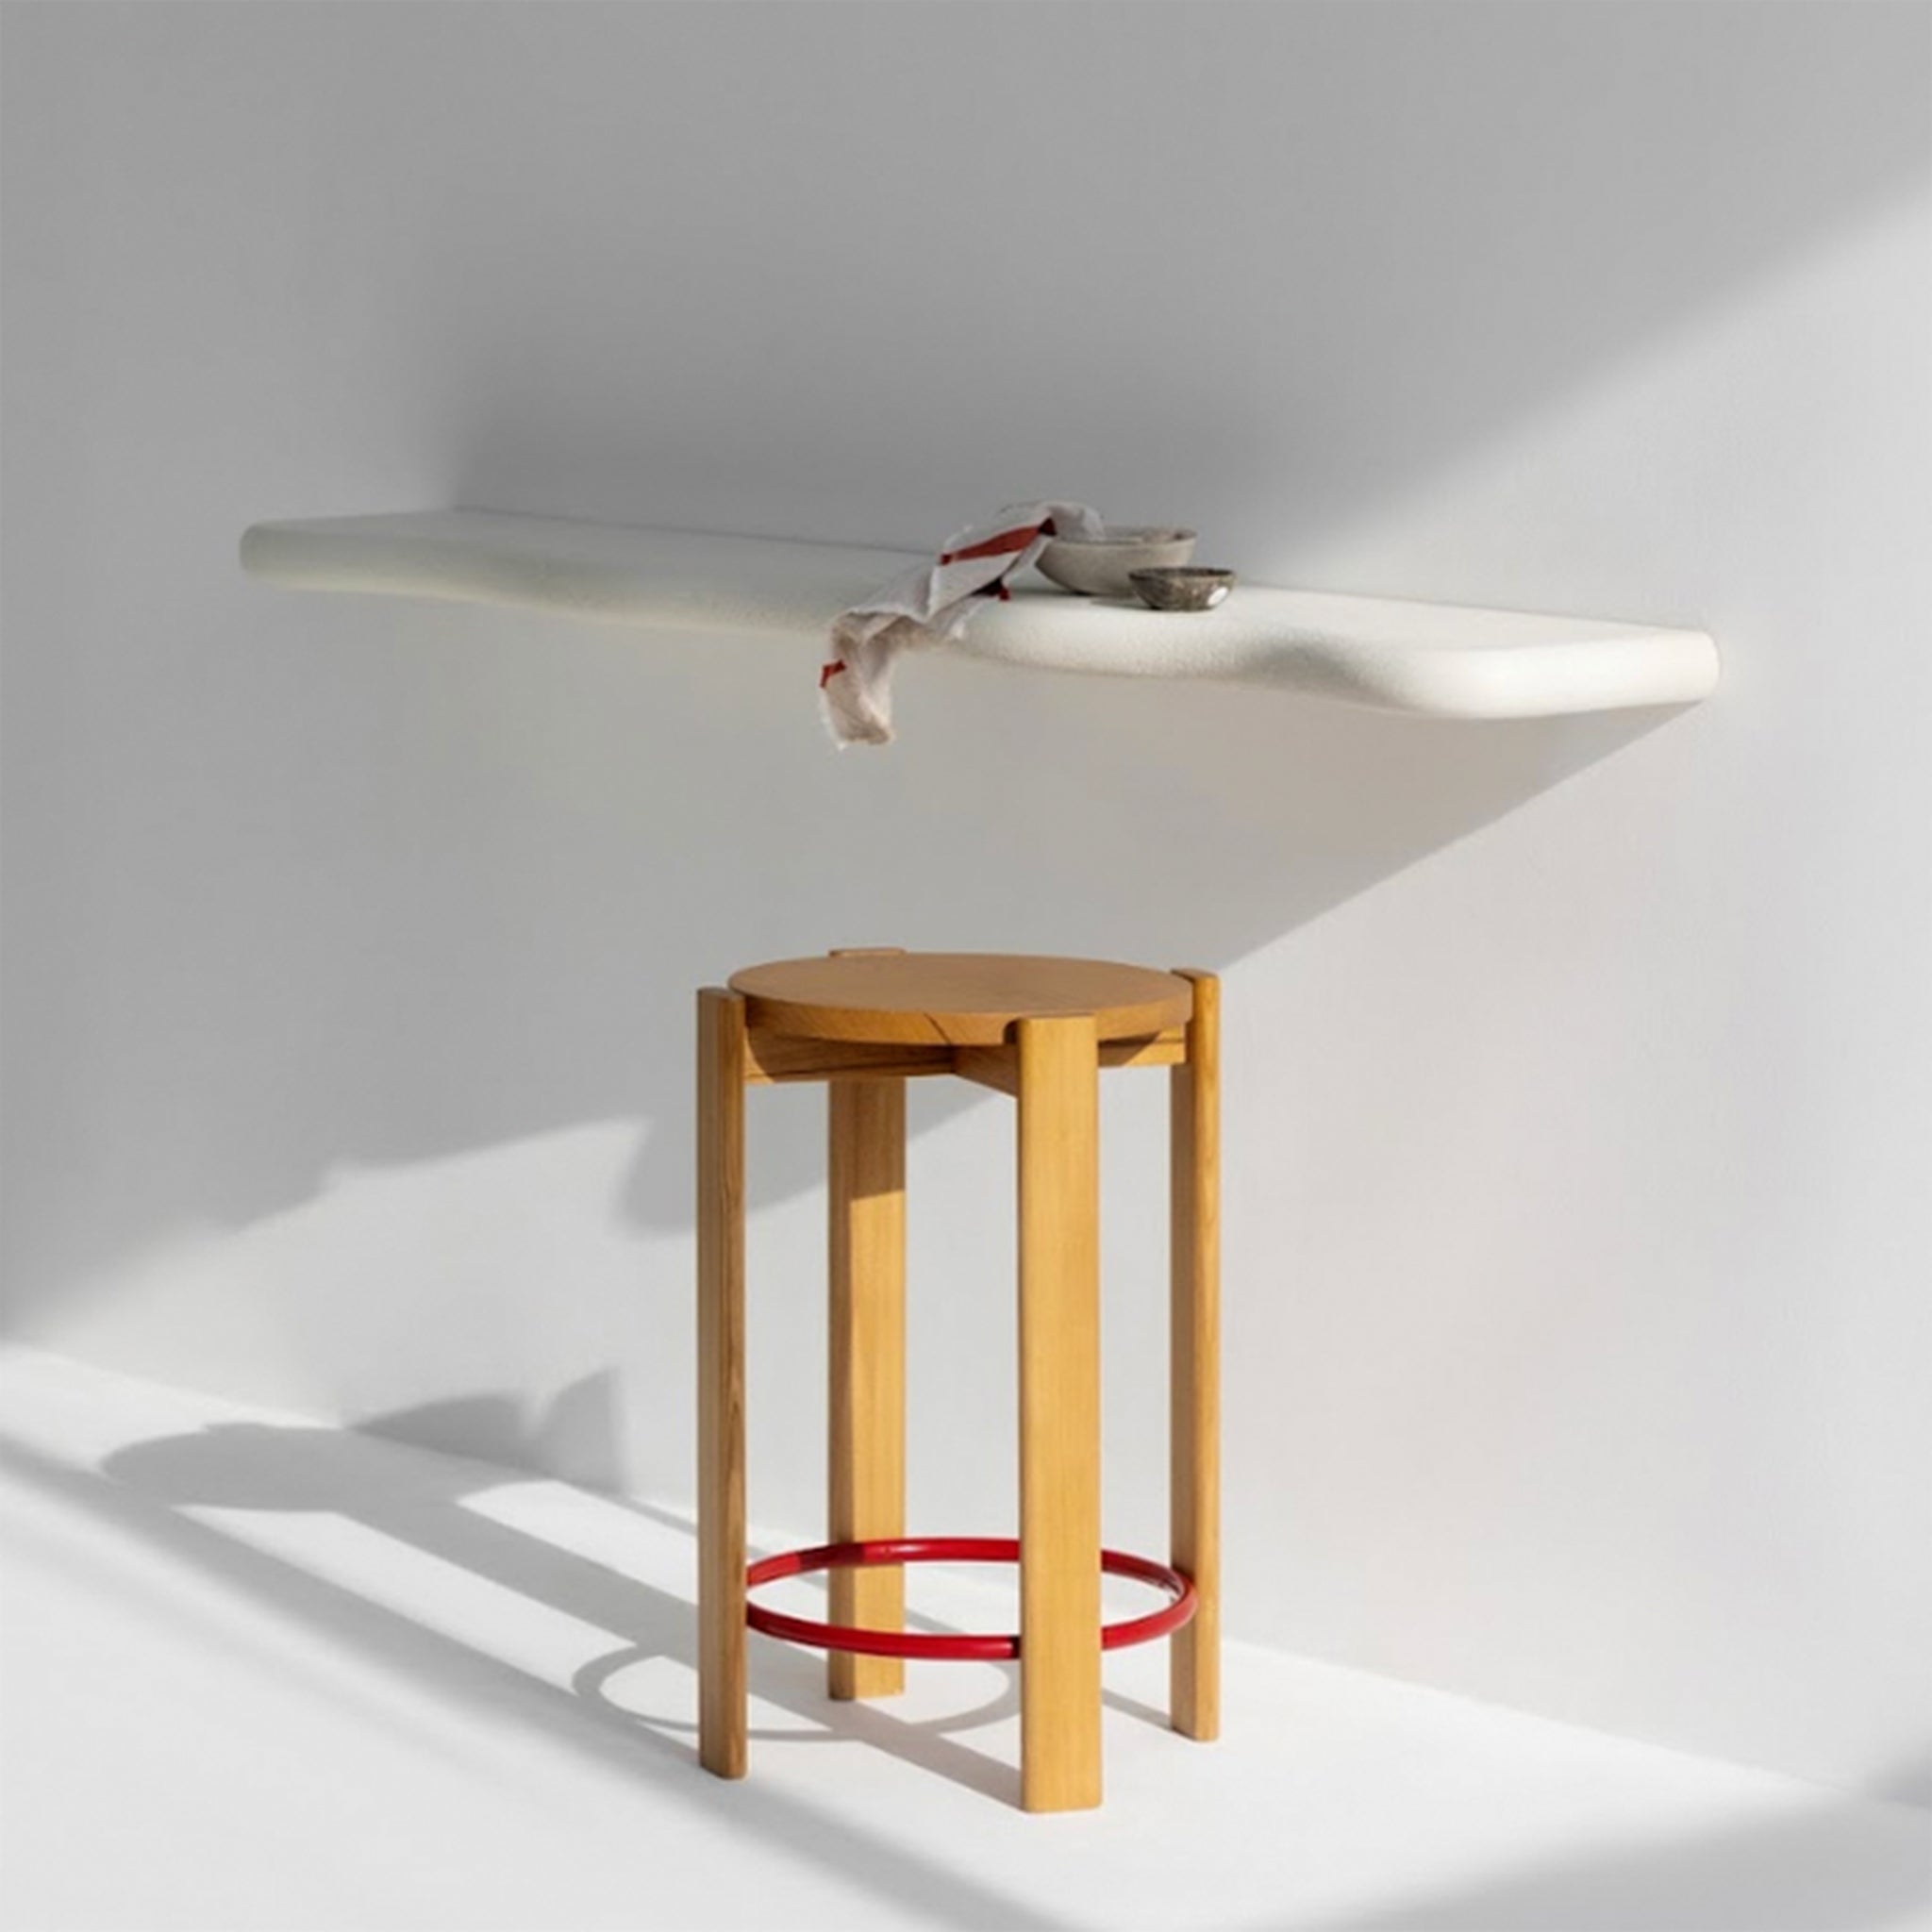 Wooden bar stool with a red circular footrest placed in a sunlit, minimalist kitchen with a floating white countertop